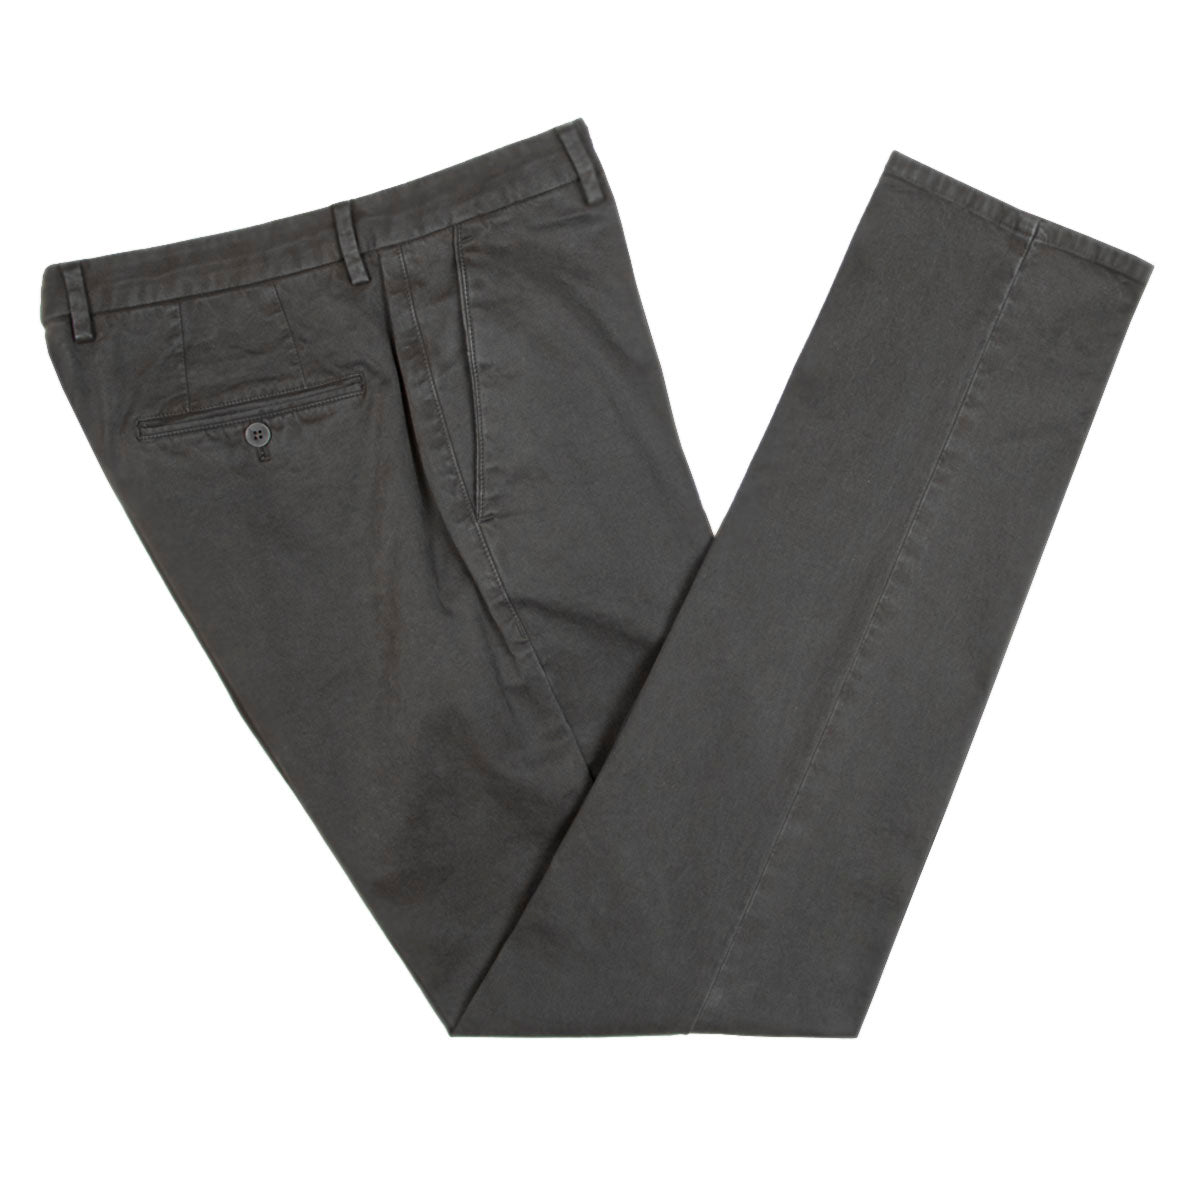 Charcoal Stretch Cotton Twill Chinos  Robert Old   